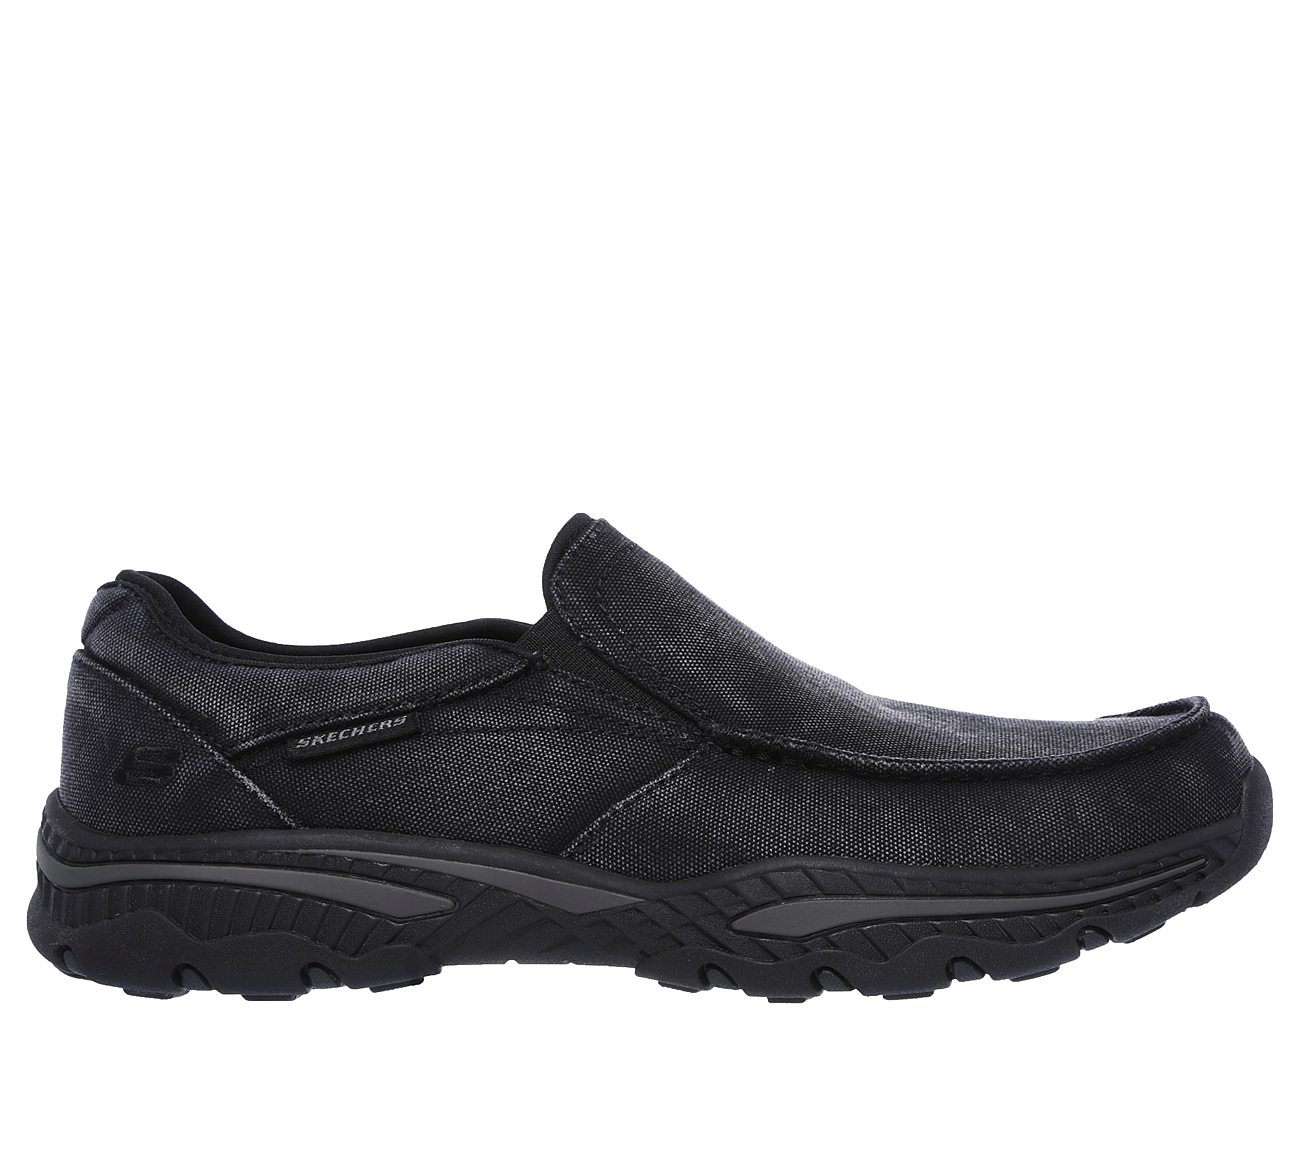 Buy SKECHERS Relaxed Fit: Creston - Moseco USA Casuals Shoes